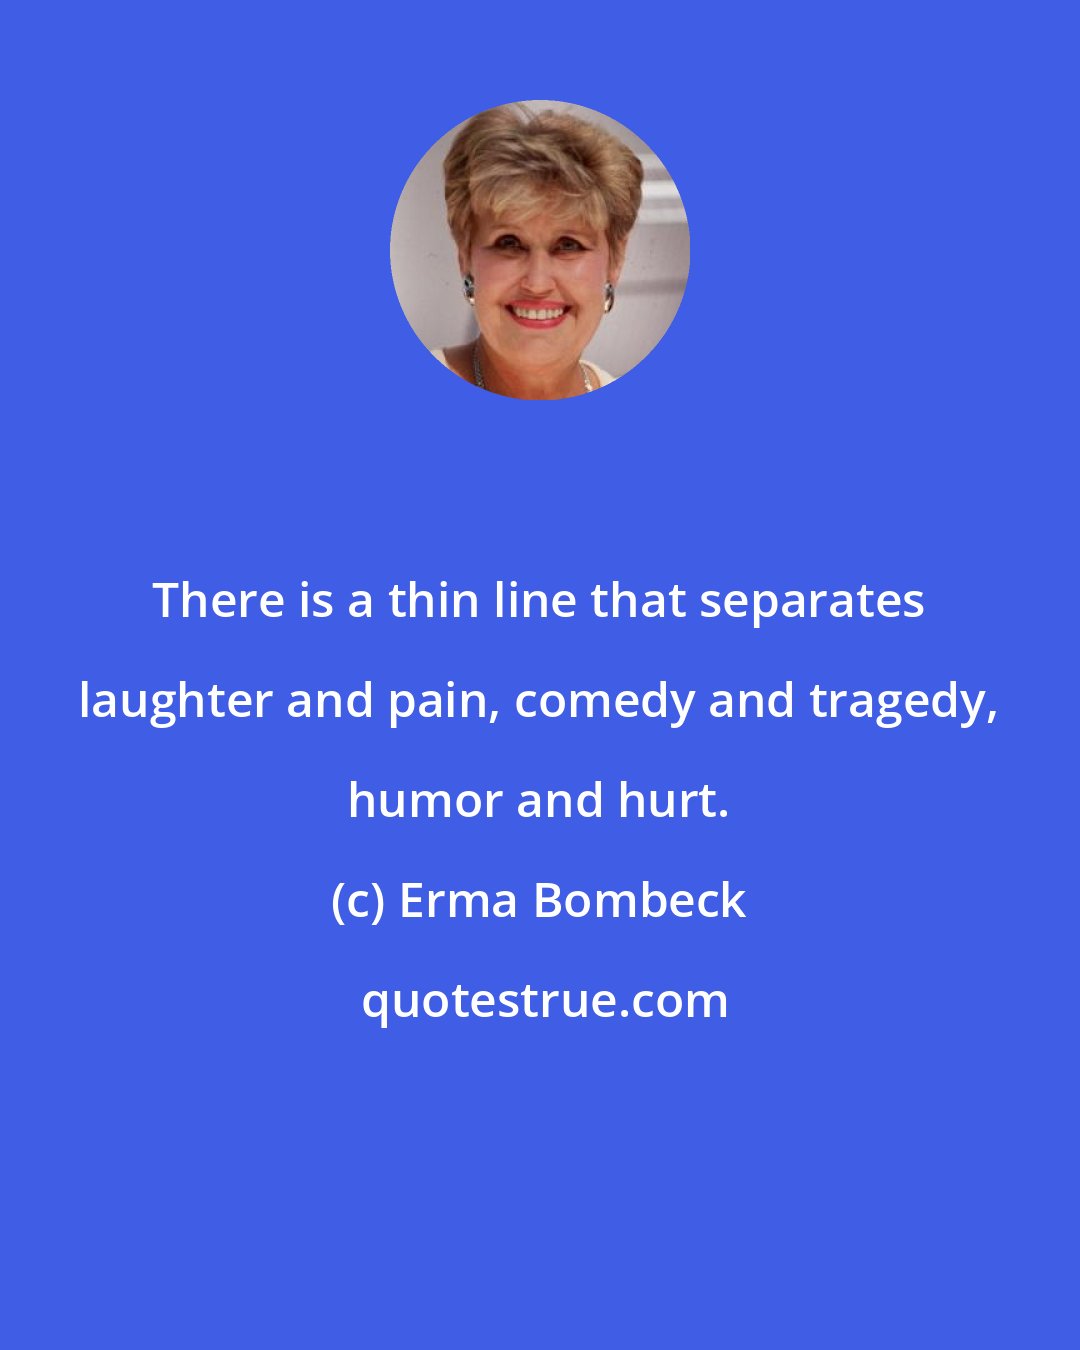 Erma Bombeck: There is a thin line that separates laughter and pain, comedy and tragedy, humor and hurt.